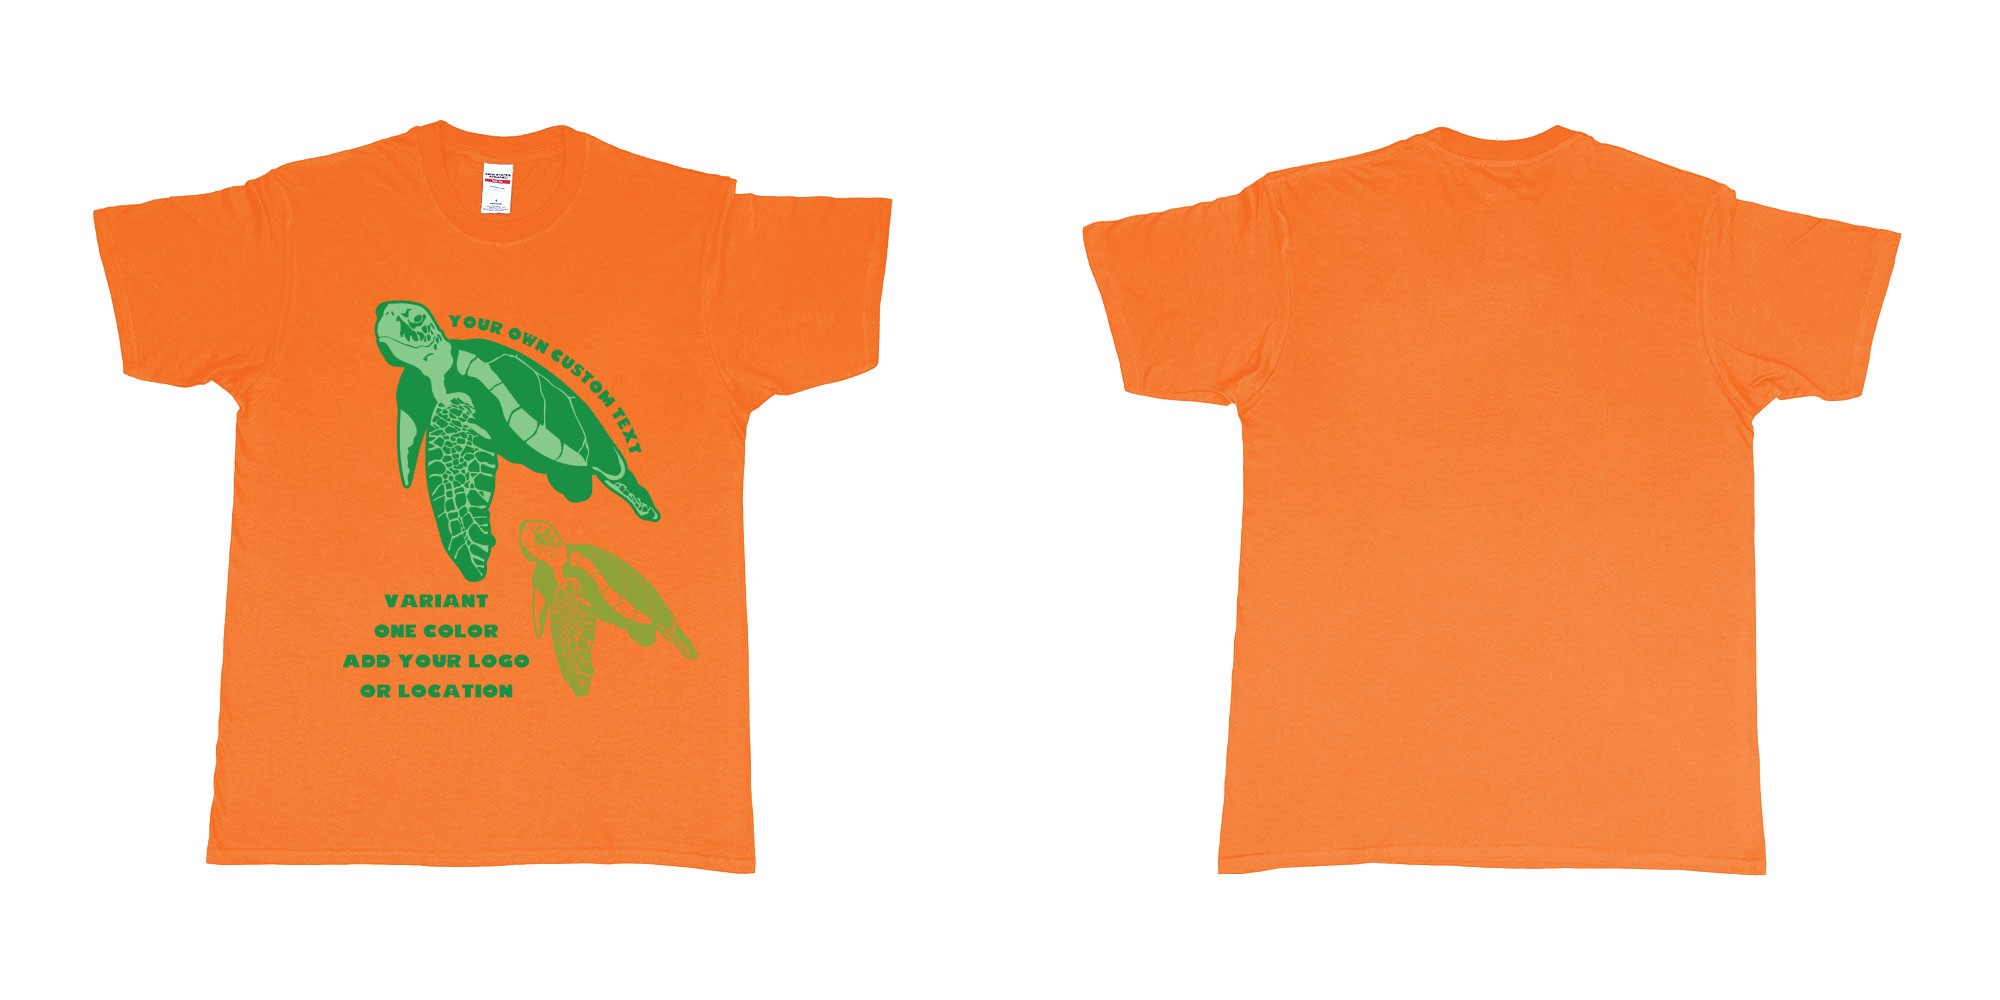 Custom tshirt design hawksbill green sea turtle chilling add logo in fabric color orange choice your own text made in Bali by The Pirate Way